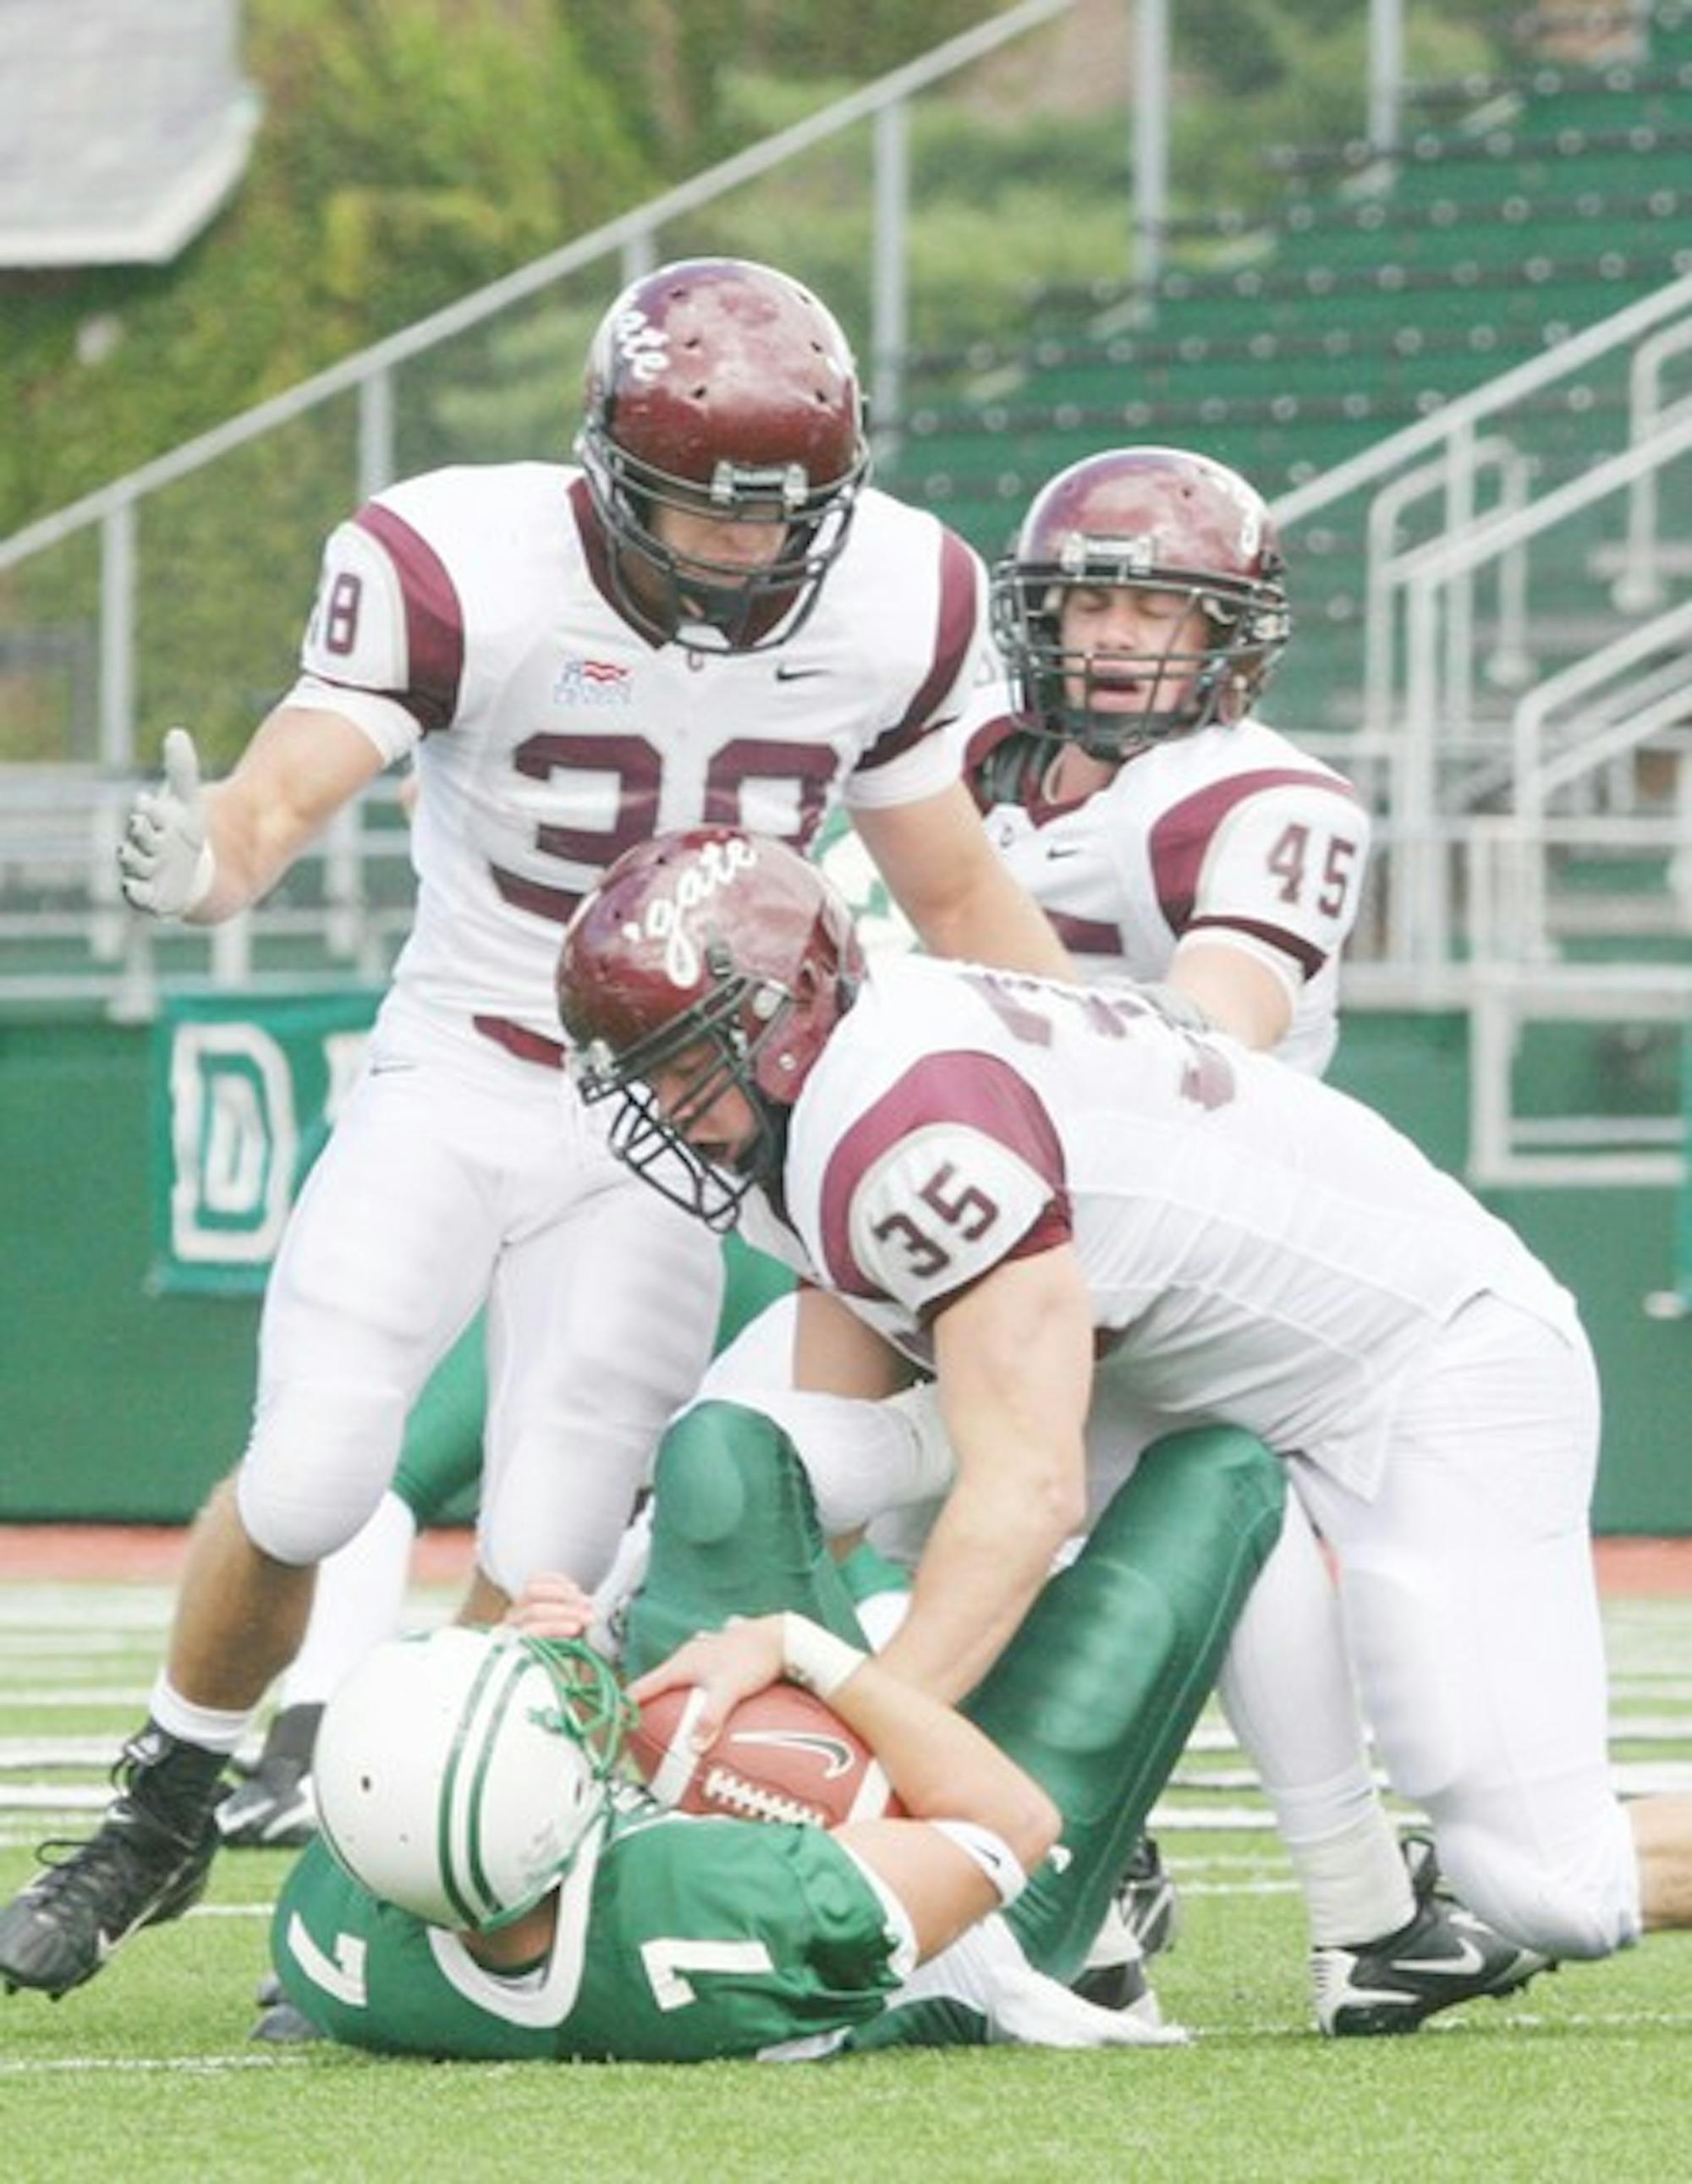 Quarterback Tom Bennewitz '08 threw for two touchdowns in the first half only to see a 28-0 lead disappear.